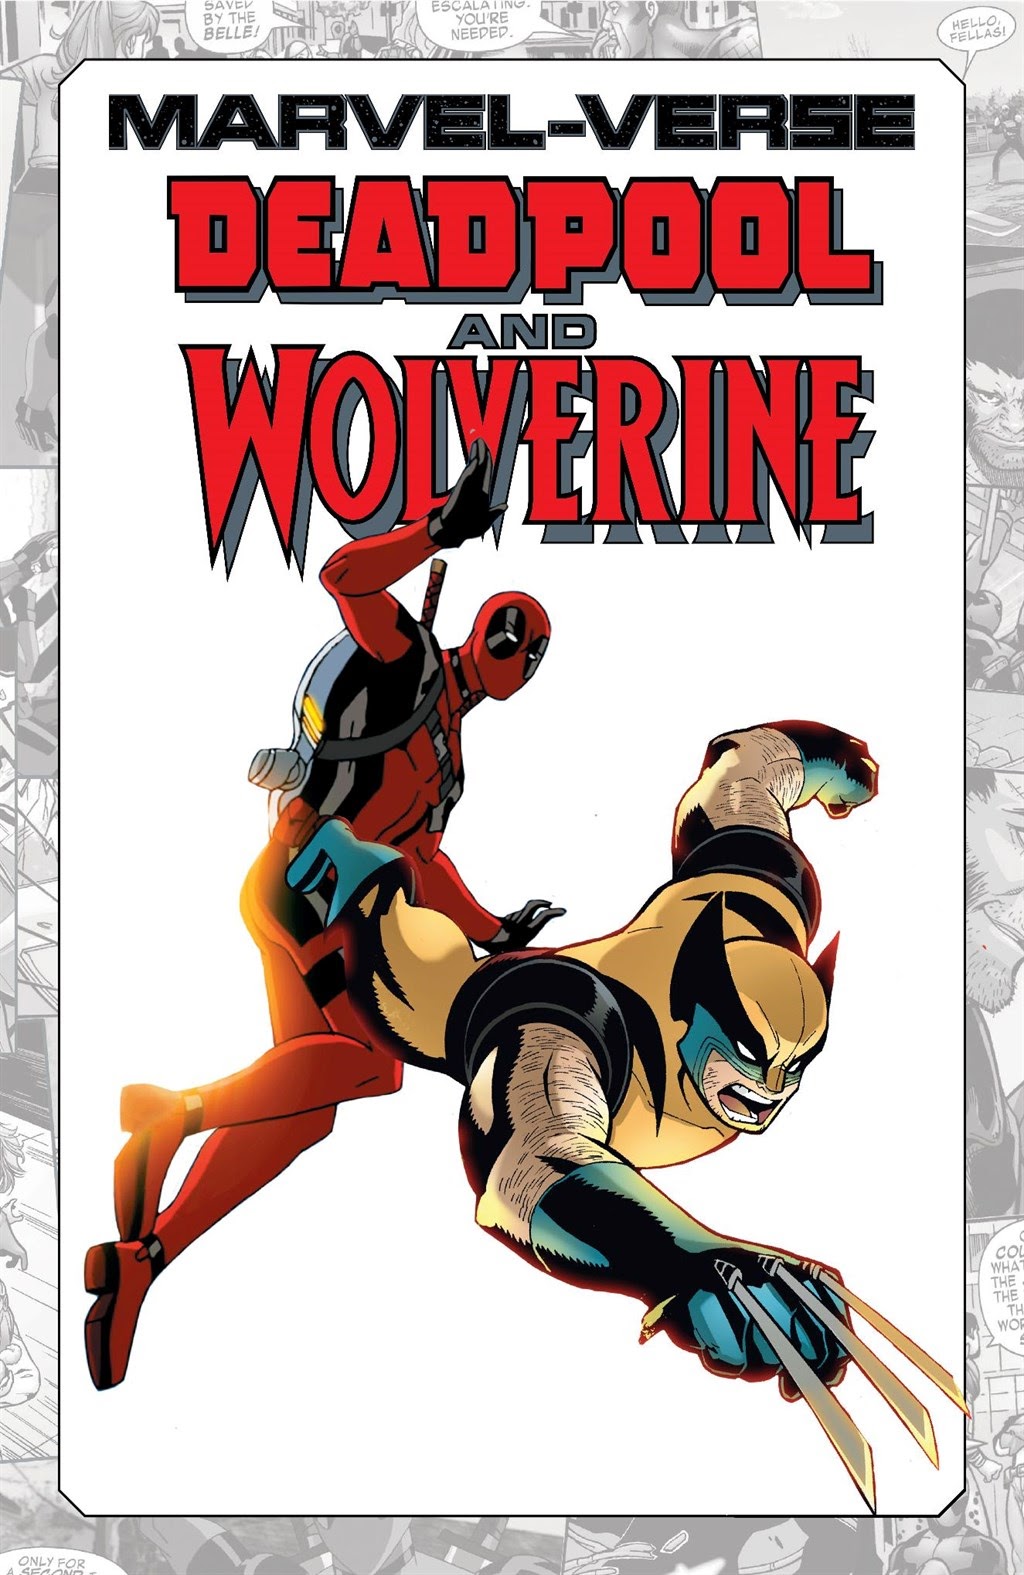 Read online Marvel-Verse (2020) comic -  Issue # Deadpool and Wolverine - 2